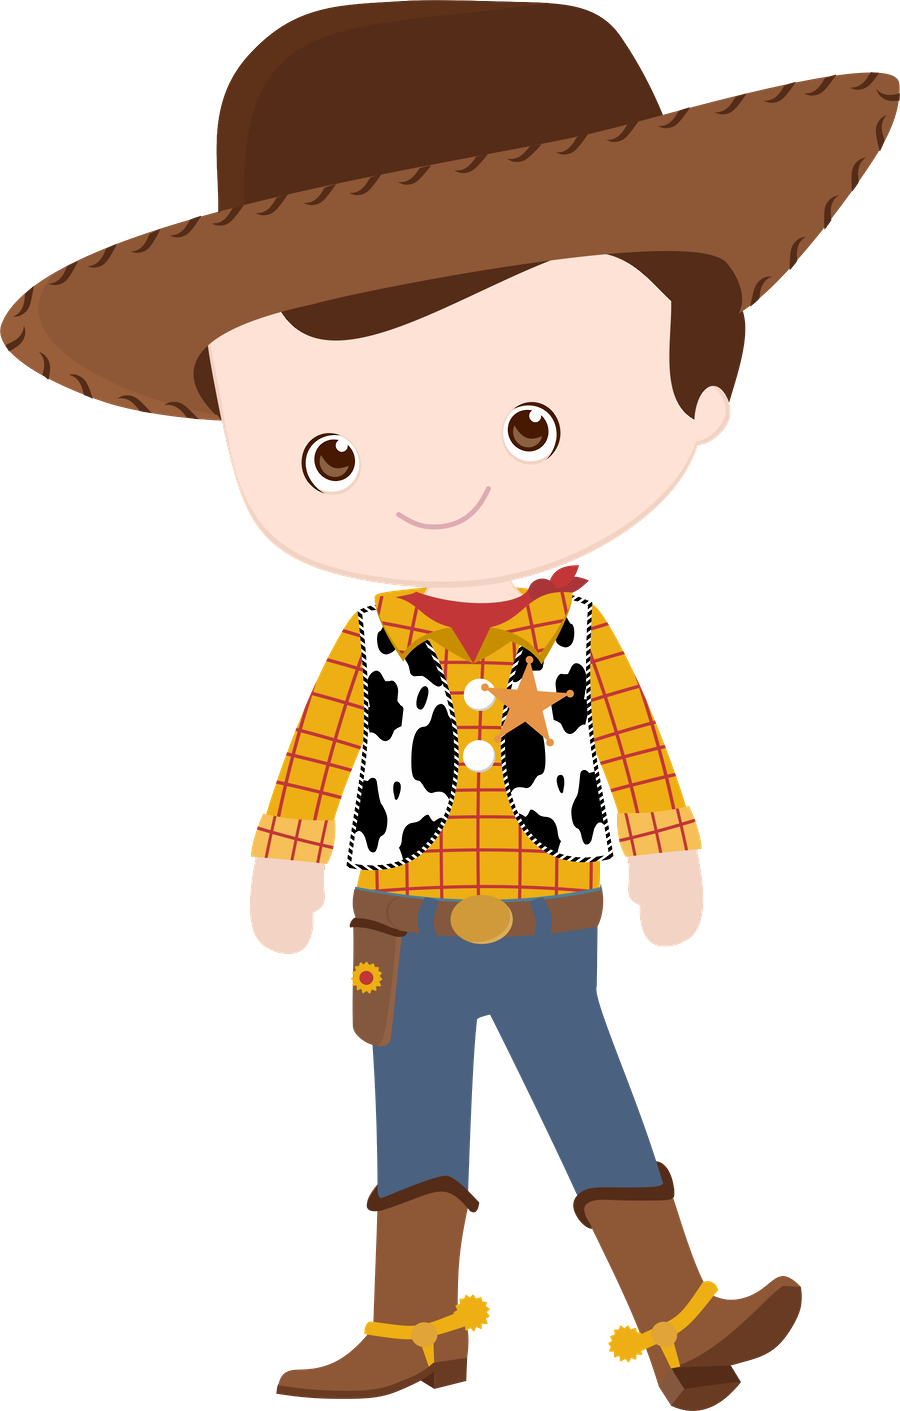 Toy Story - Minus - Woody Toy Story Baby (900x1411)